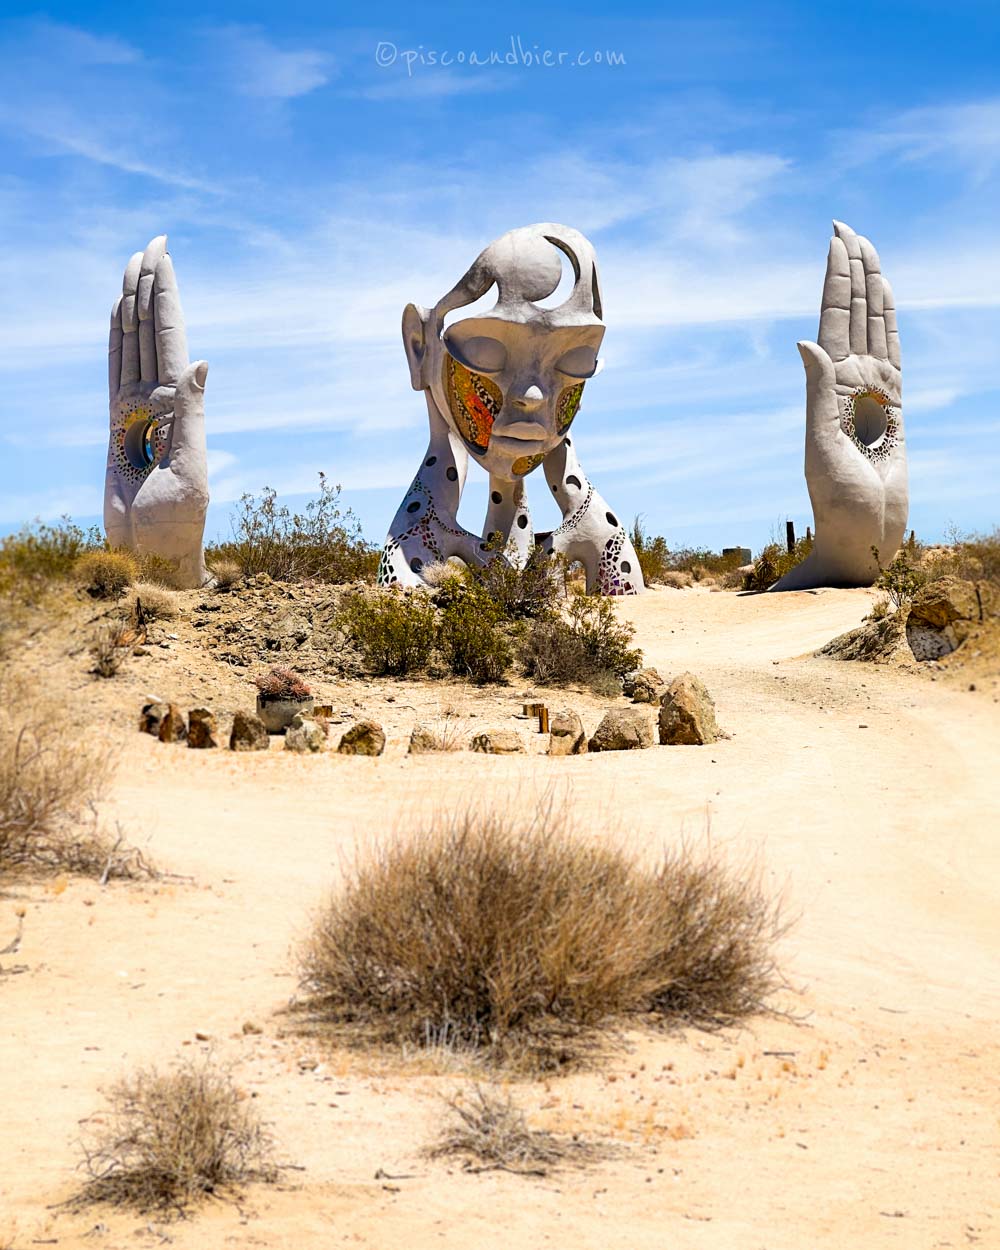 Visiting The Transmission Sculpture In Joshua Tree By Daniel Popper